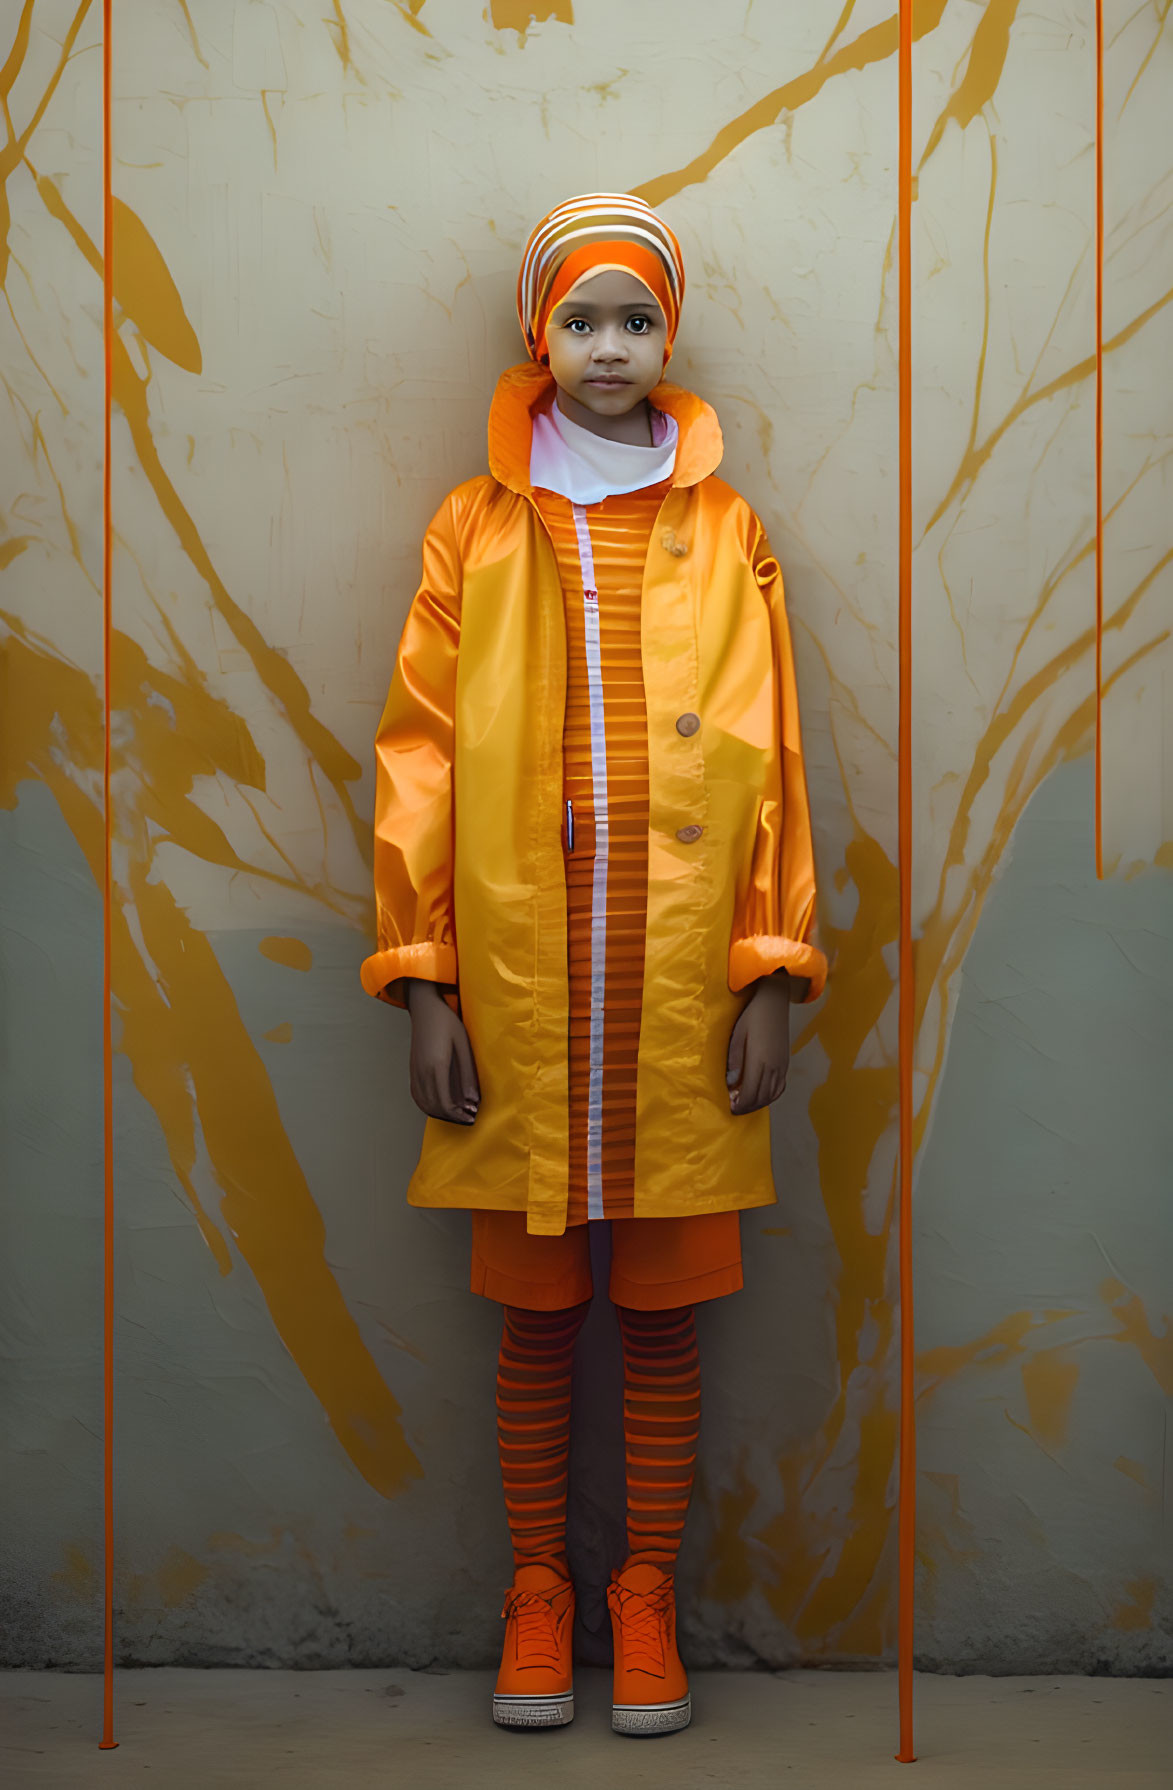 Young girl with orange striped